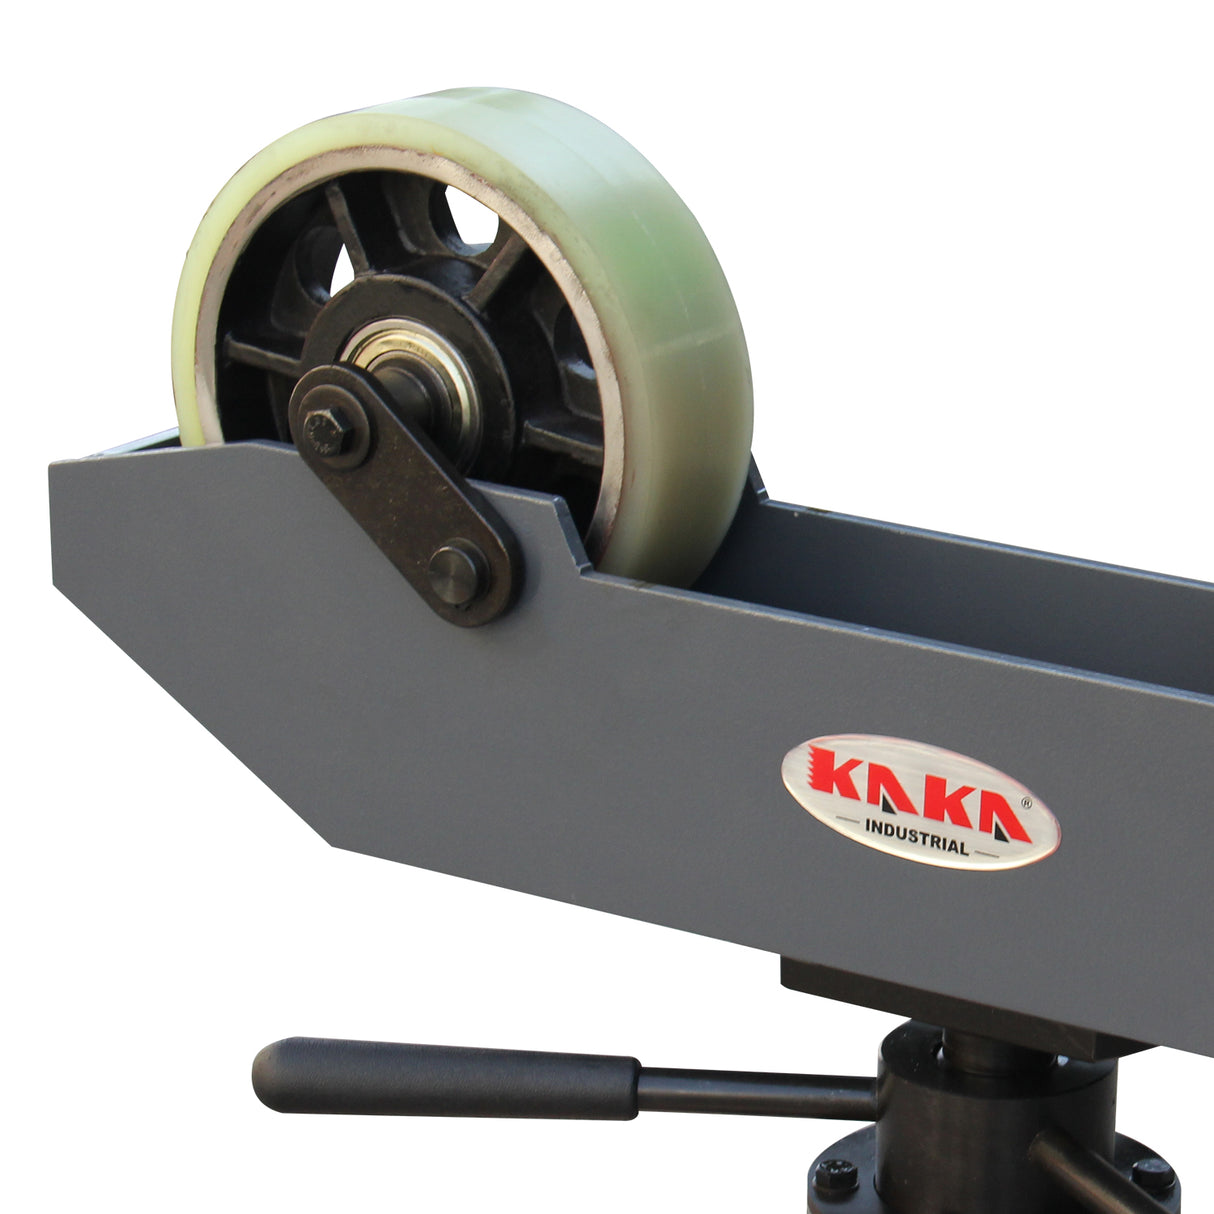 KAKA INDUSTRIAL Outboard Support Stands